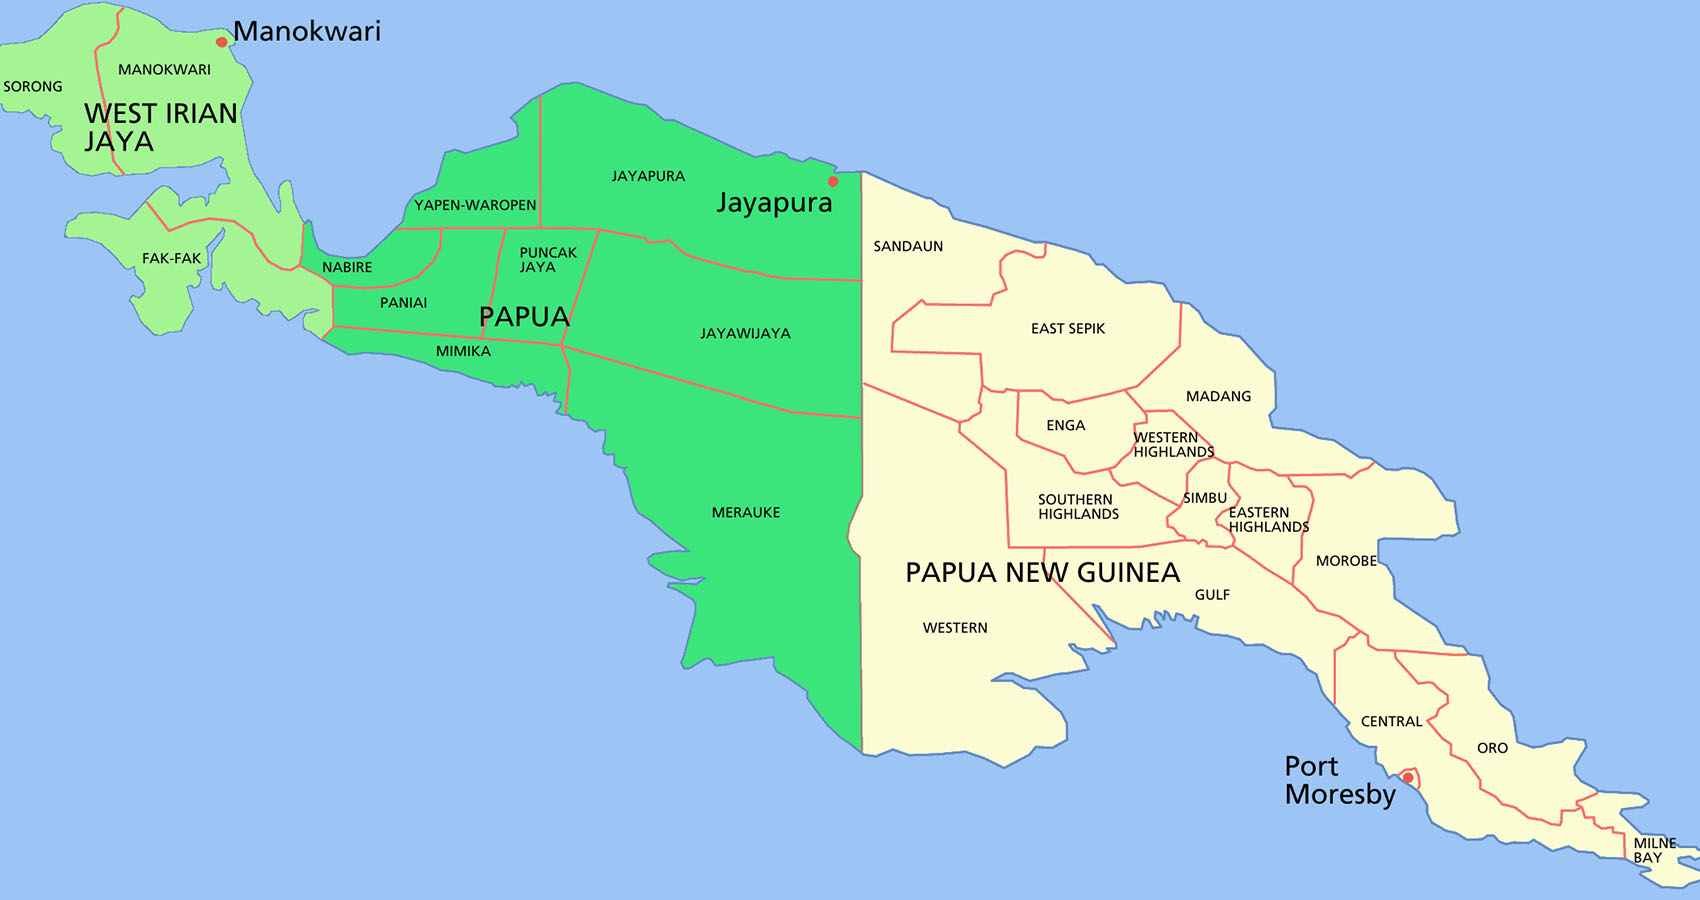 hard to believe facts - 1/6 of the world’s living languages are only spoken in New Guinea.